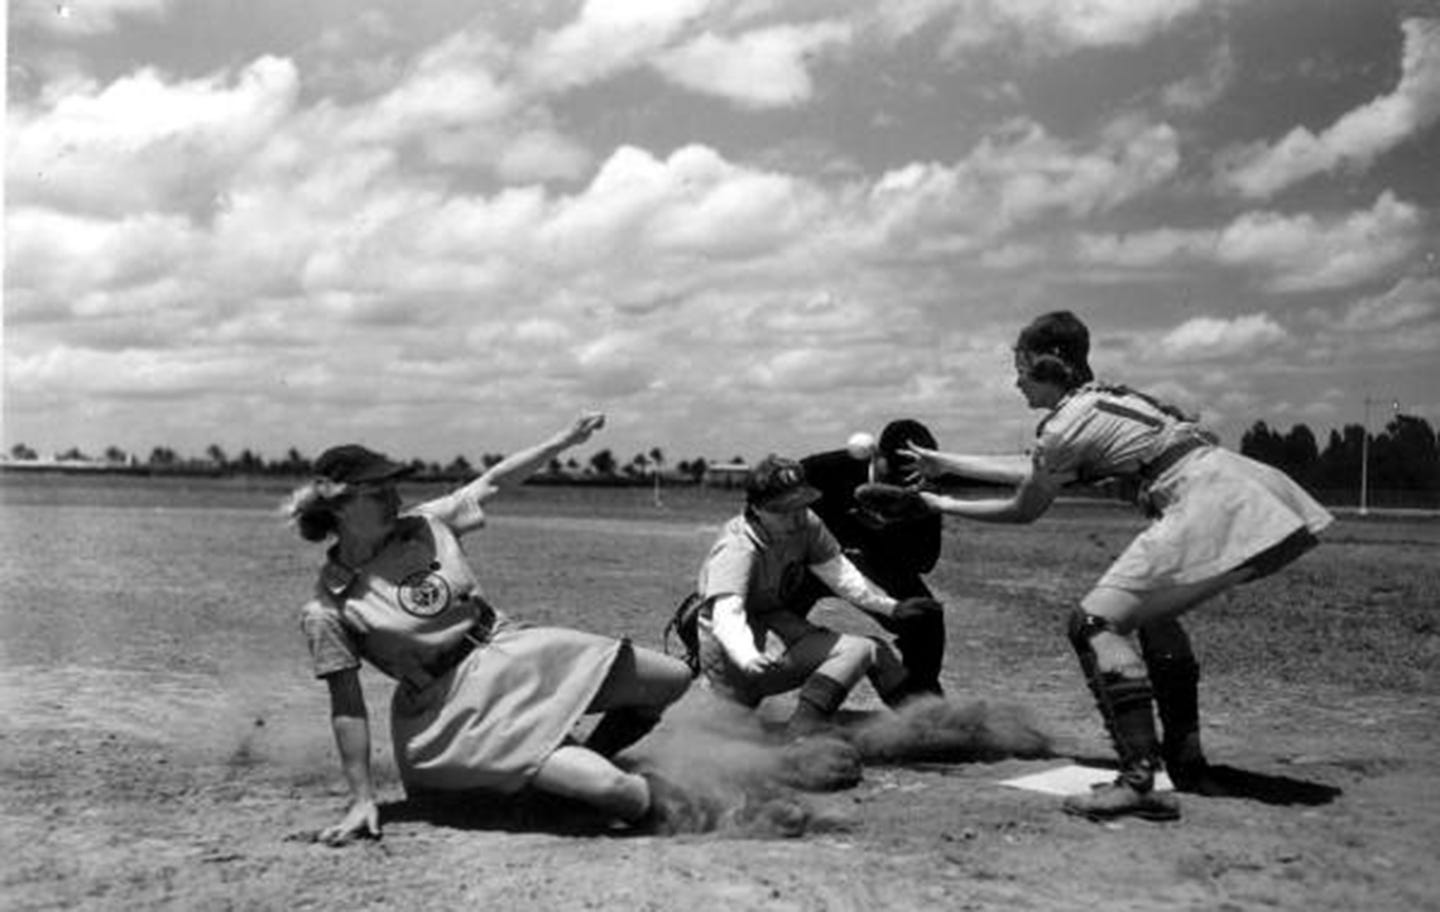 Members of the All-American Girls Professional Baseball League and an umpire, 1948. (Photo courtesy State Archives of Florida)